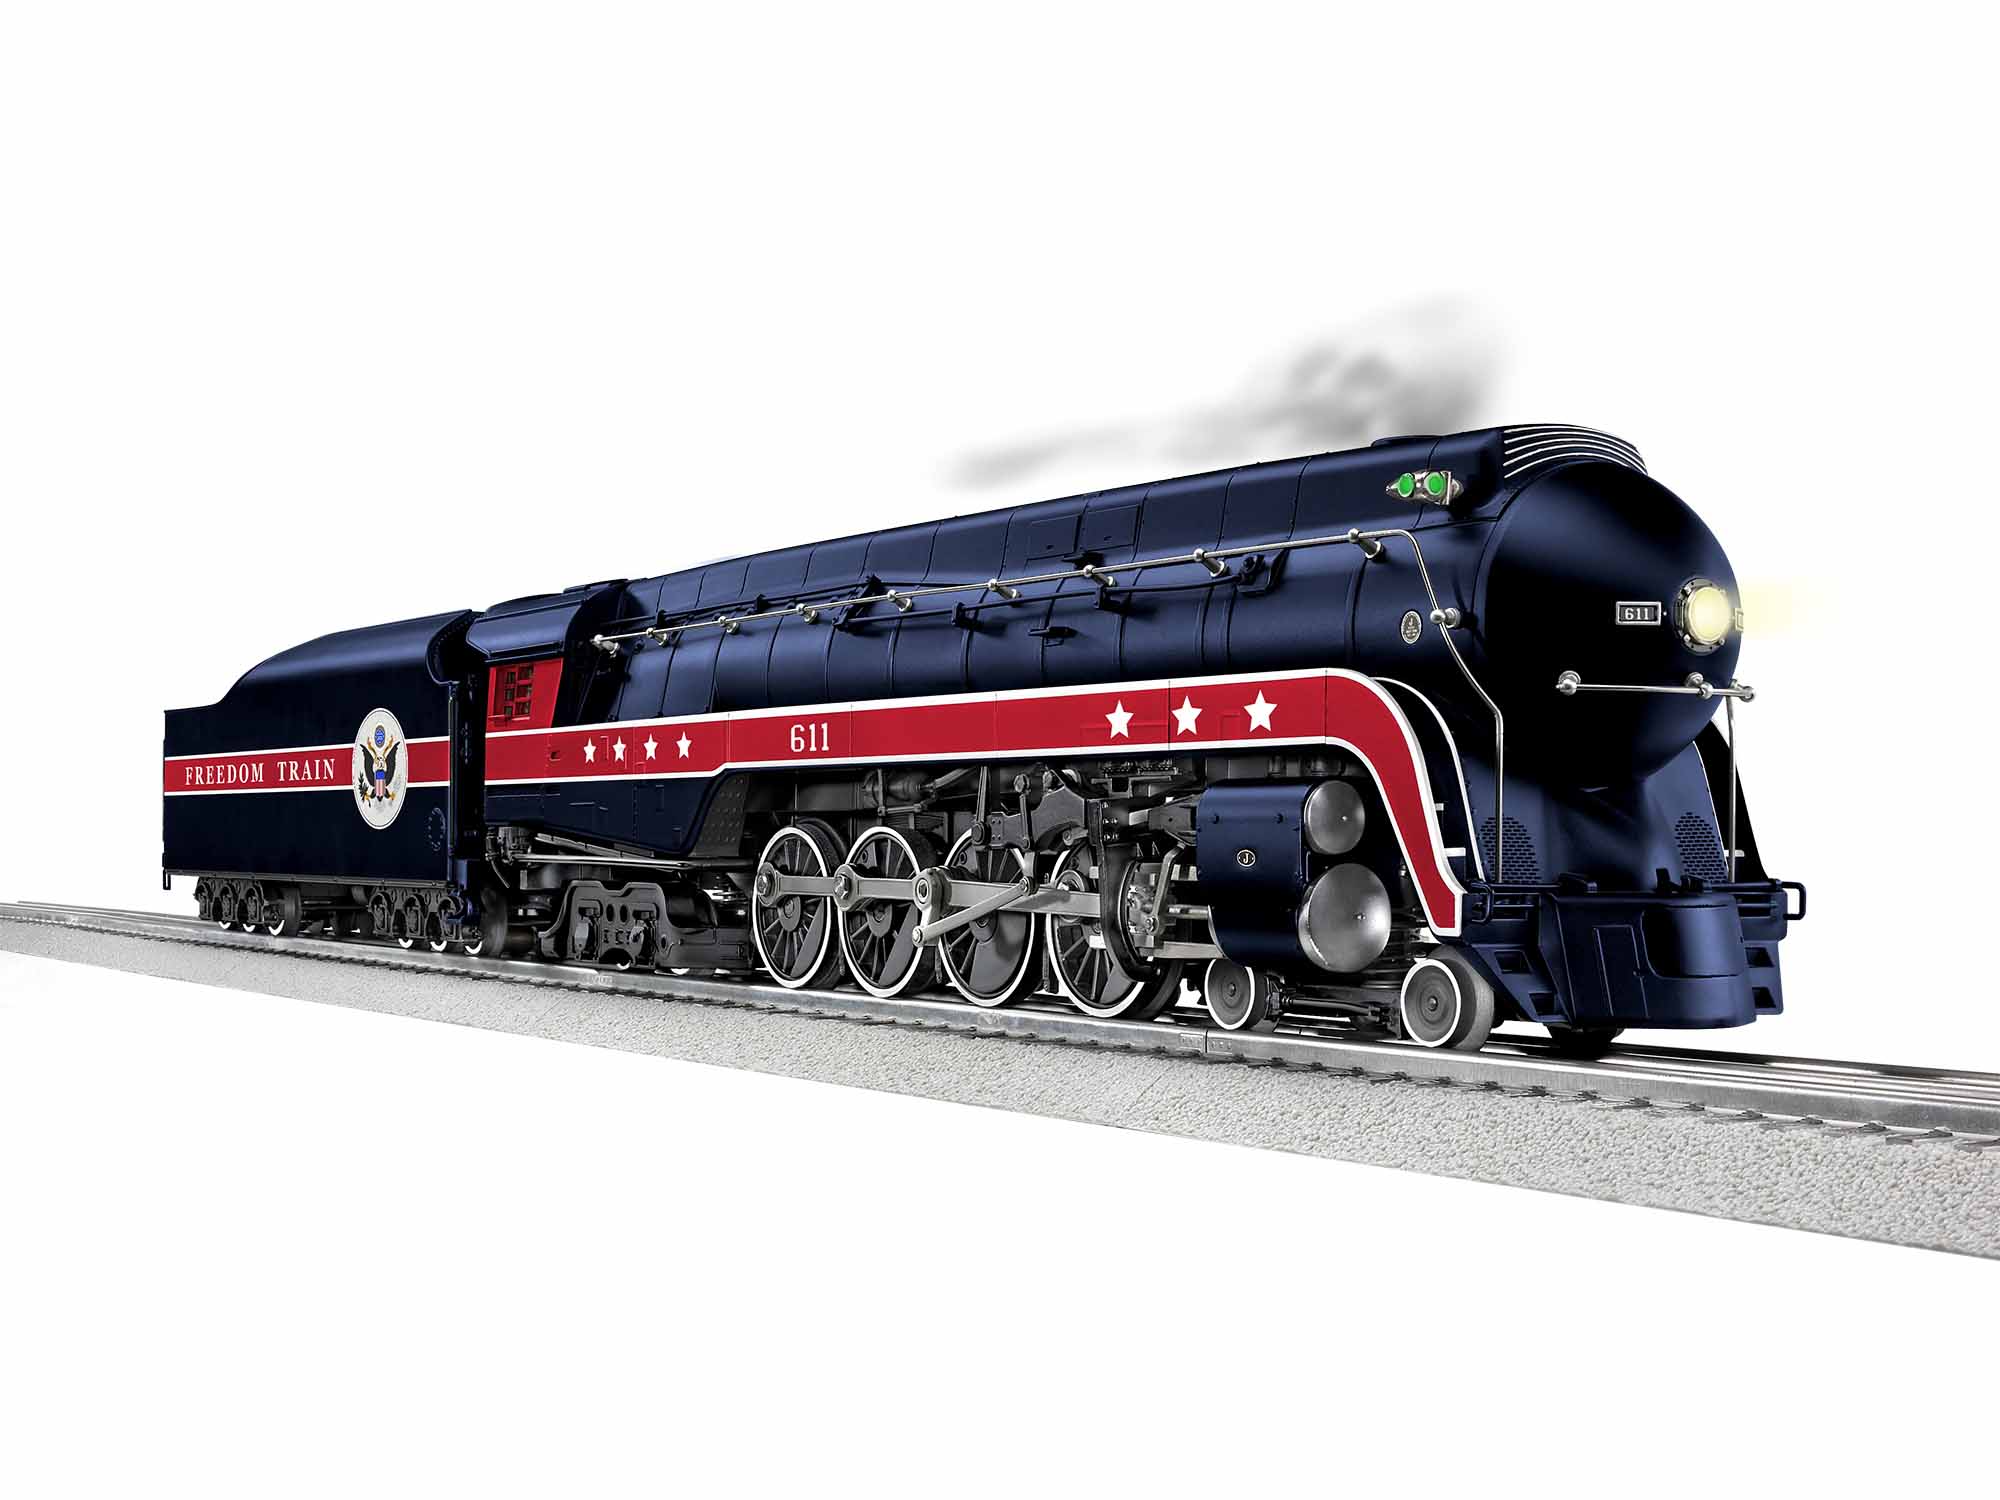 1931380 AMERICAN FREEDOM TRAIN 611 LEGACY J CLASS - Click Image to Close